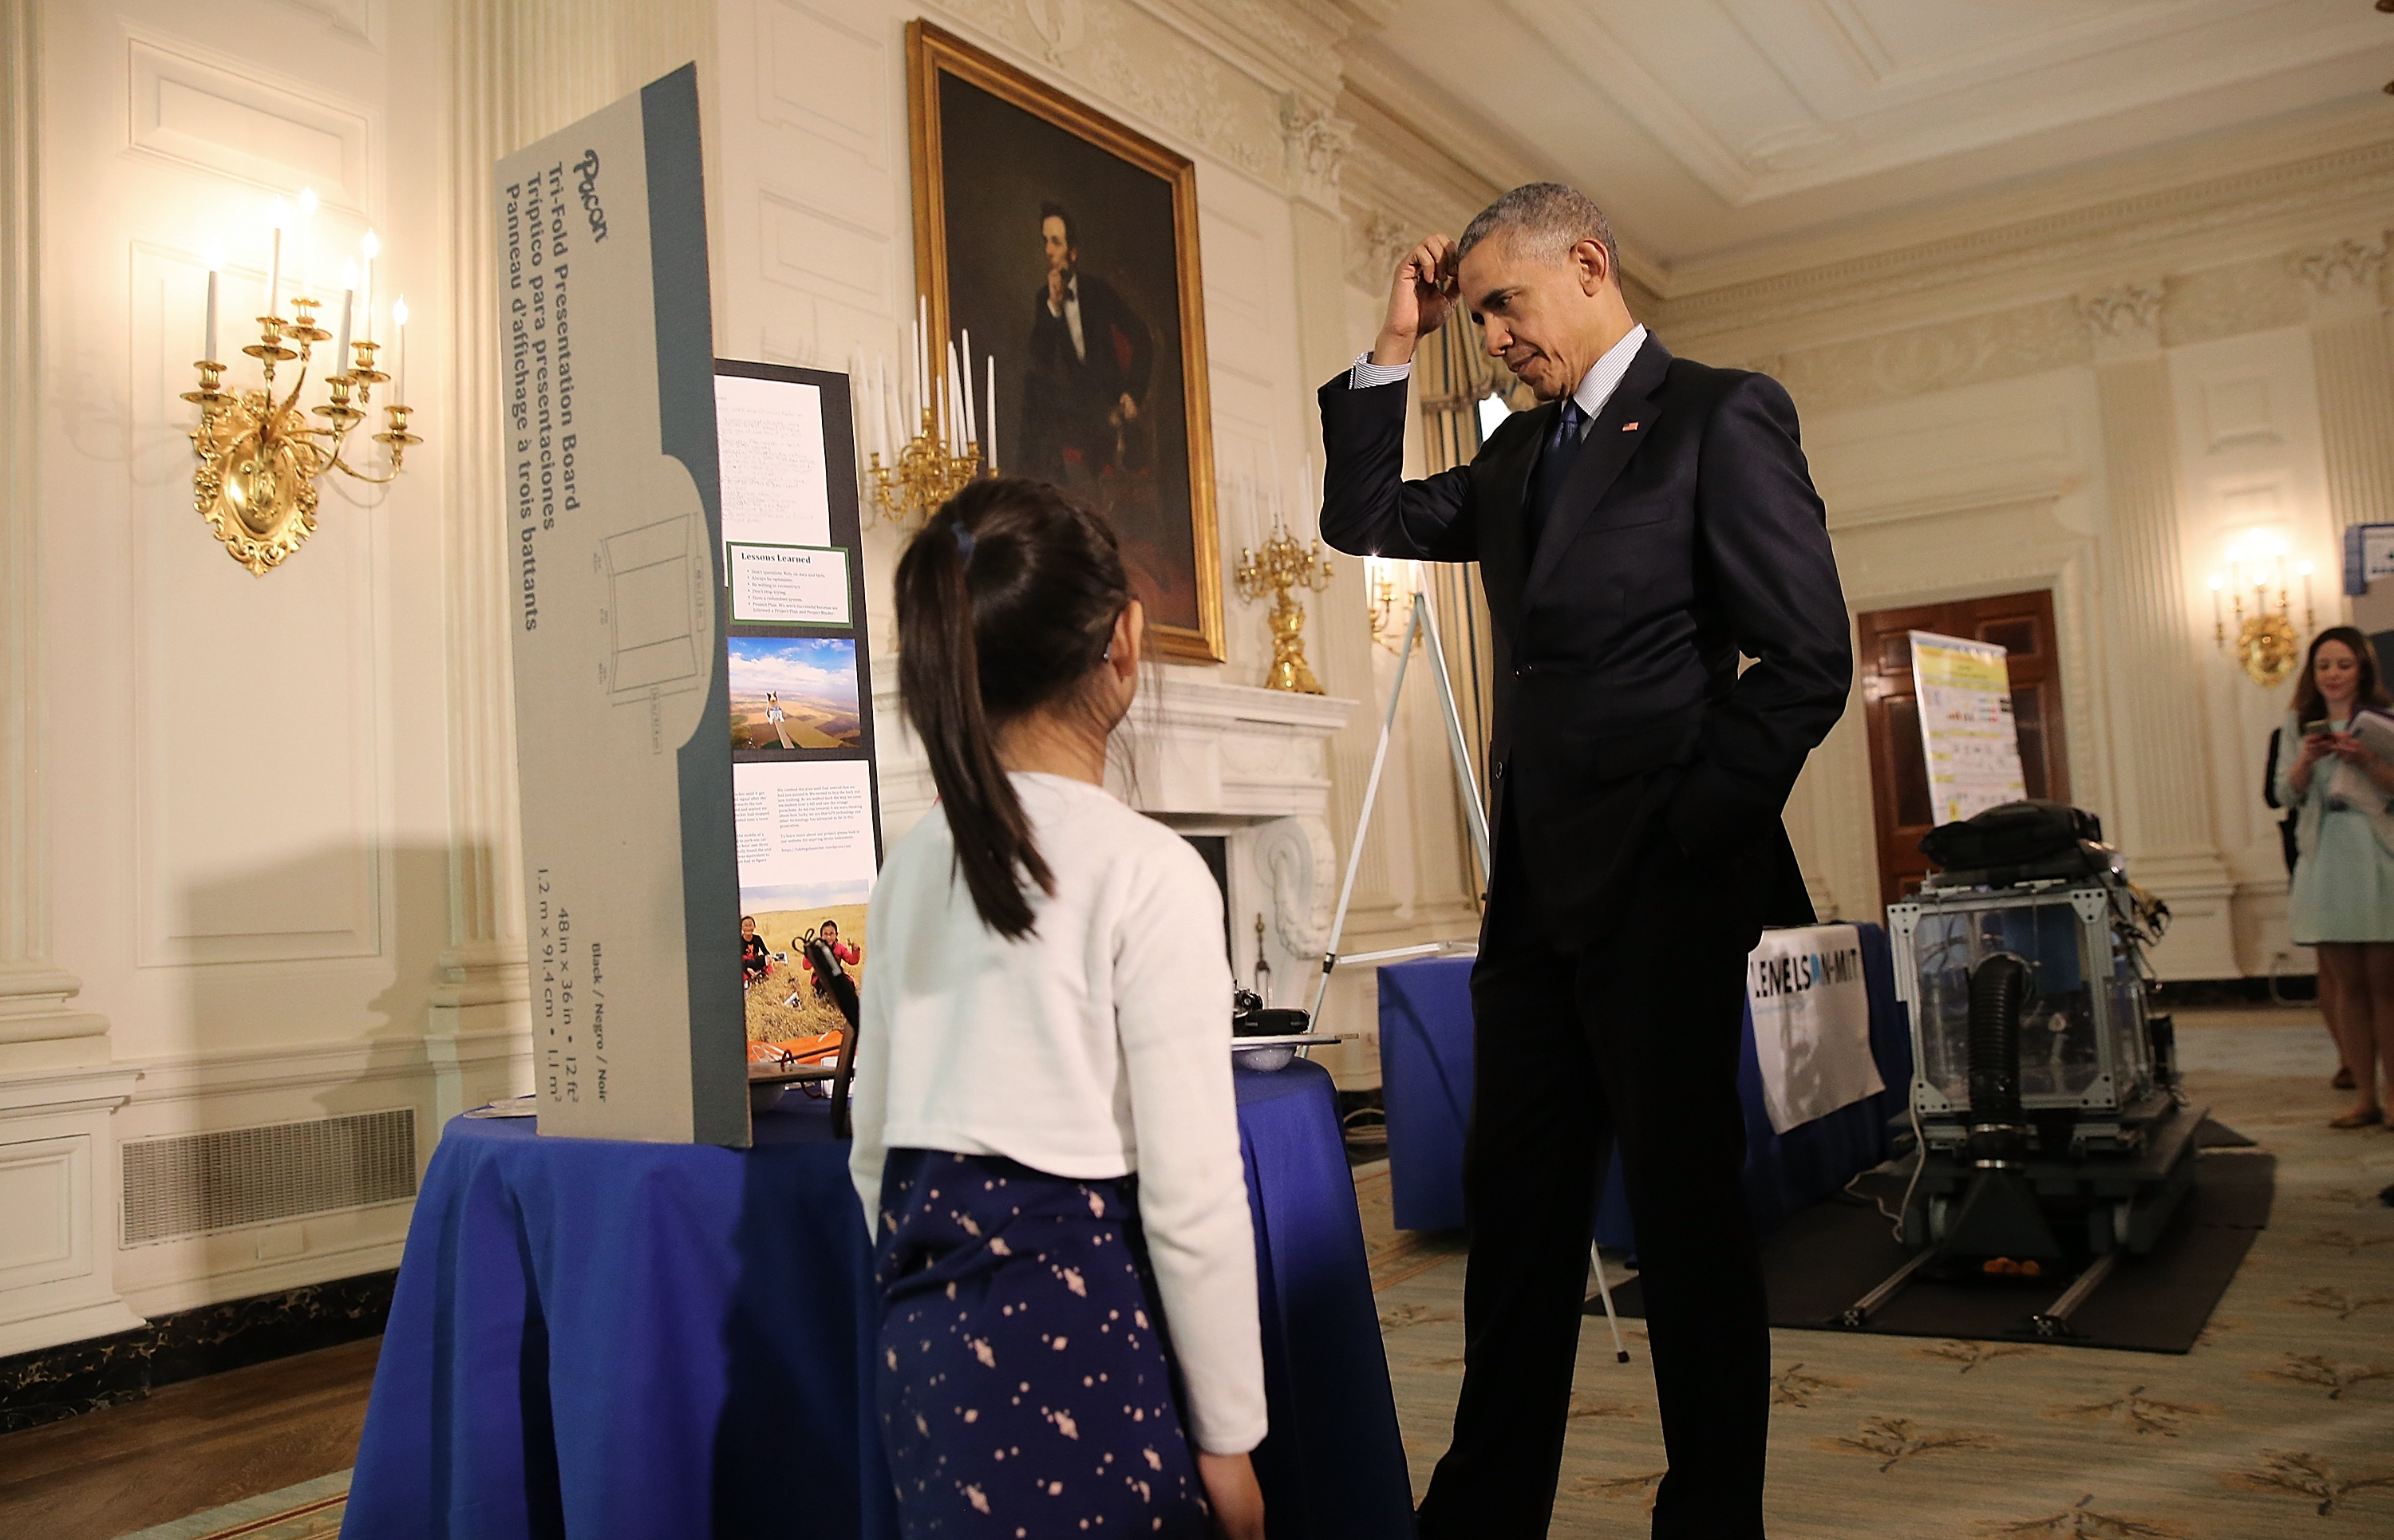 U.S. President Barack Obama listens to sisters Kimberly Yeung (L) and Rebecca Yeung  explain their science project while touring exhibits at the White House Science Fair April 13, 2016 in Washington, D.C. (Win McNamee&mdash;Getty Images)